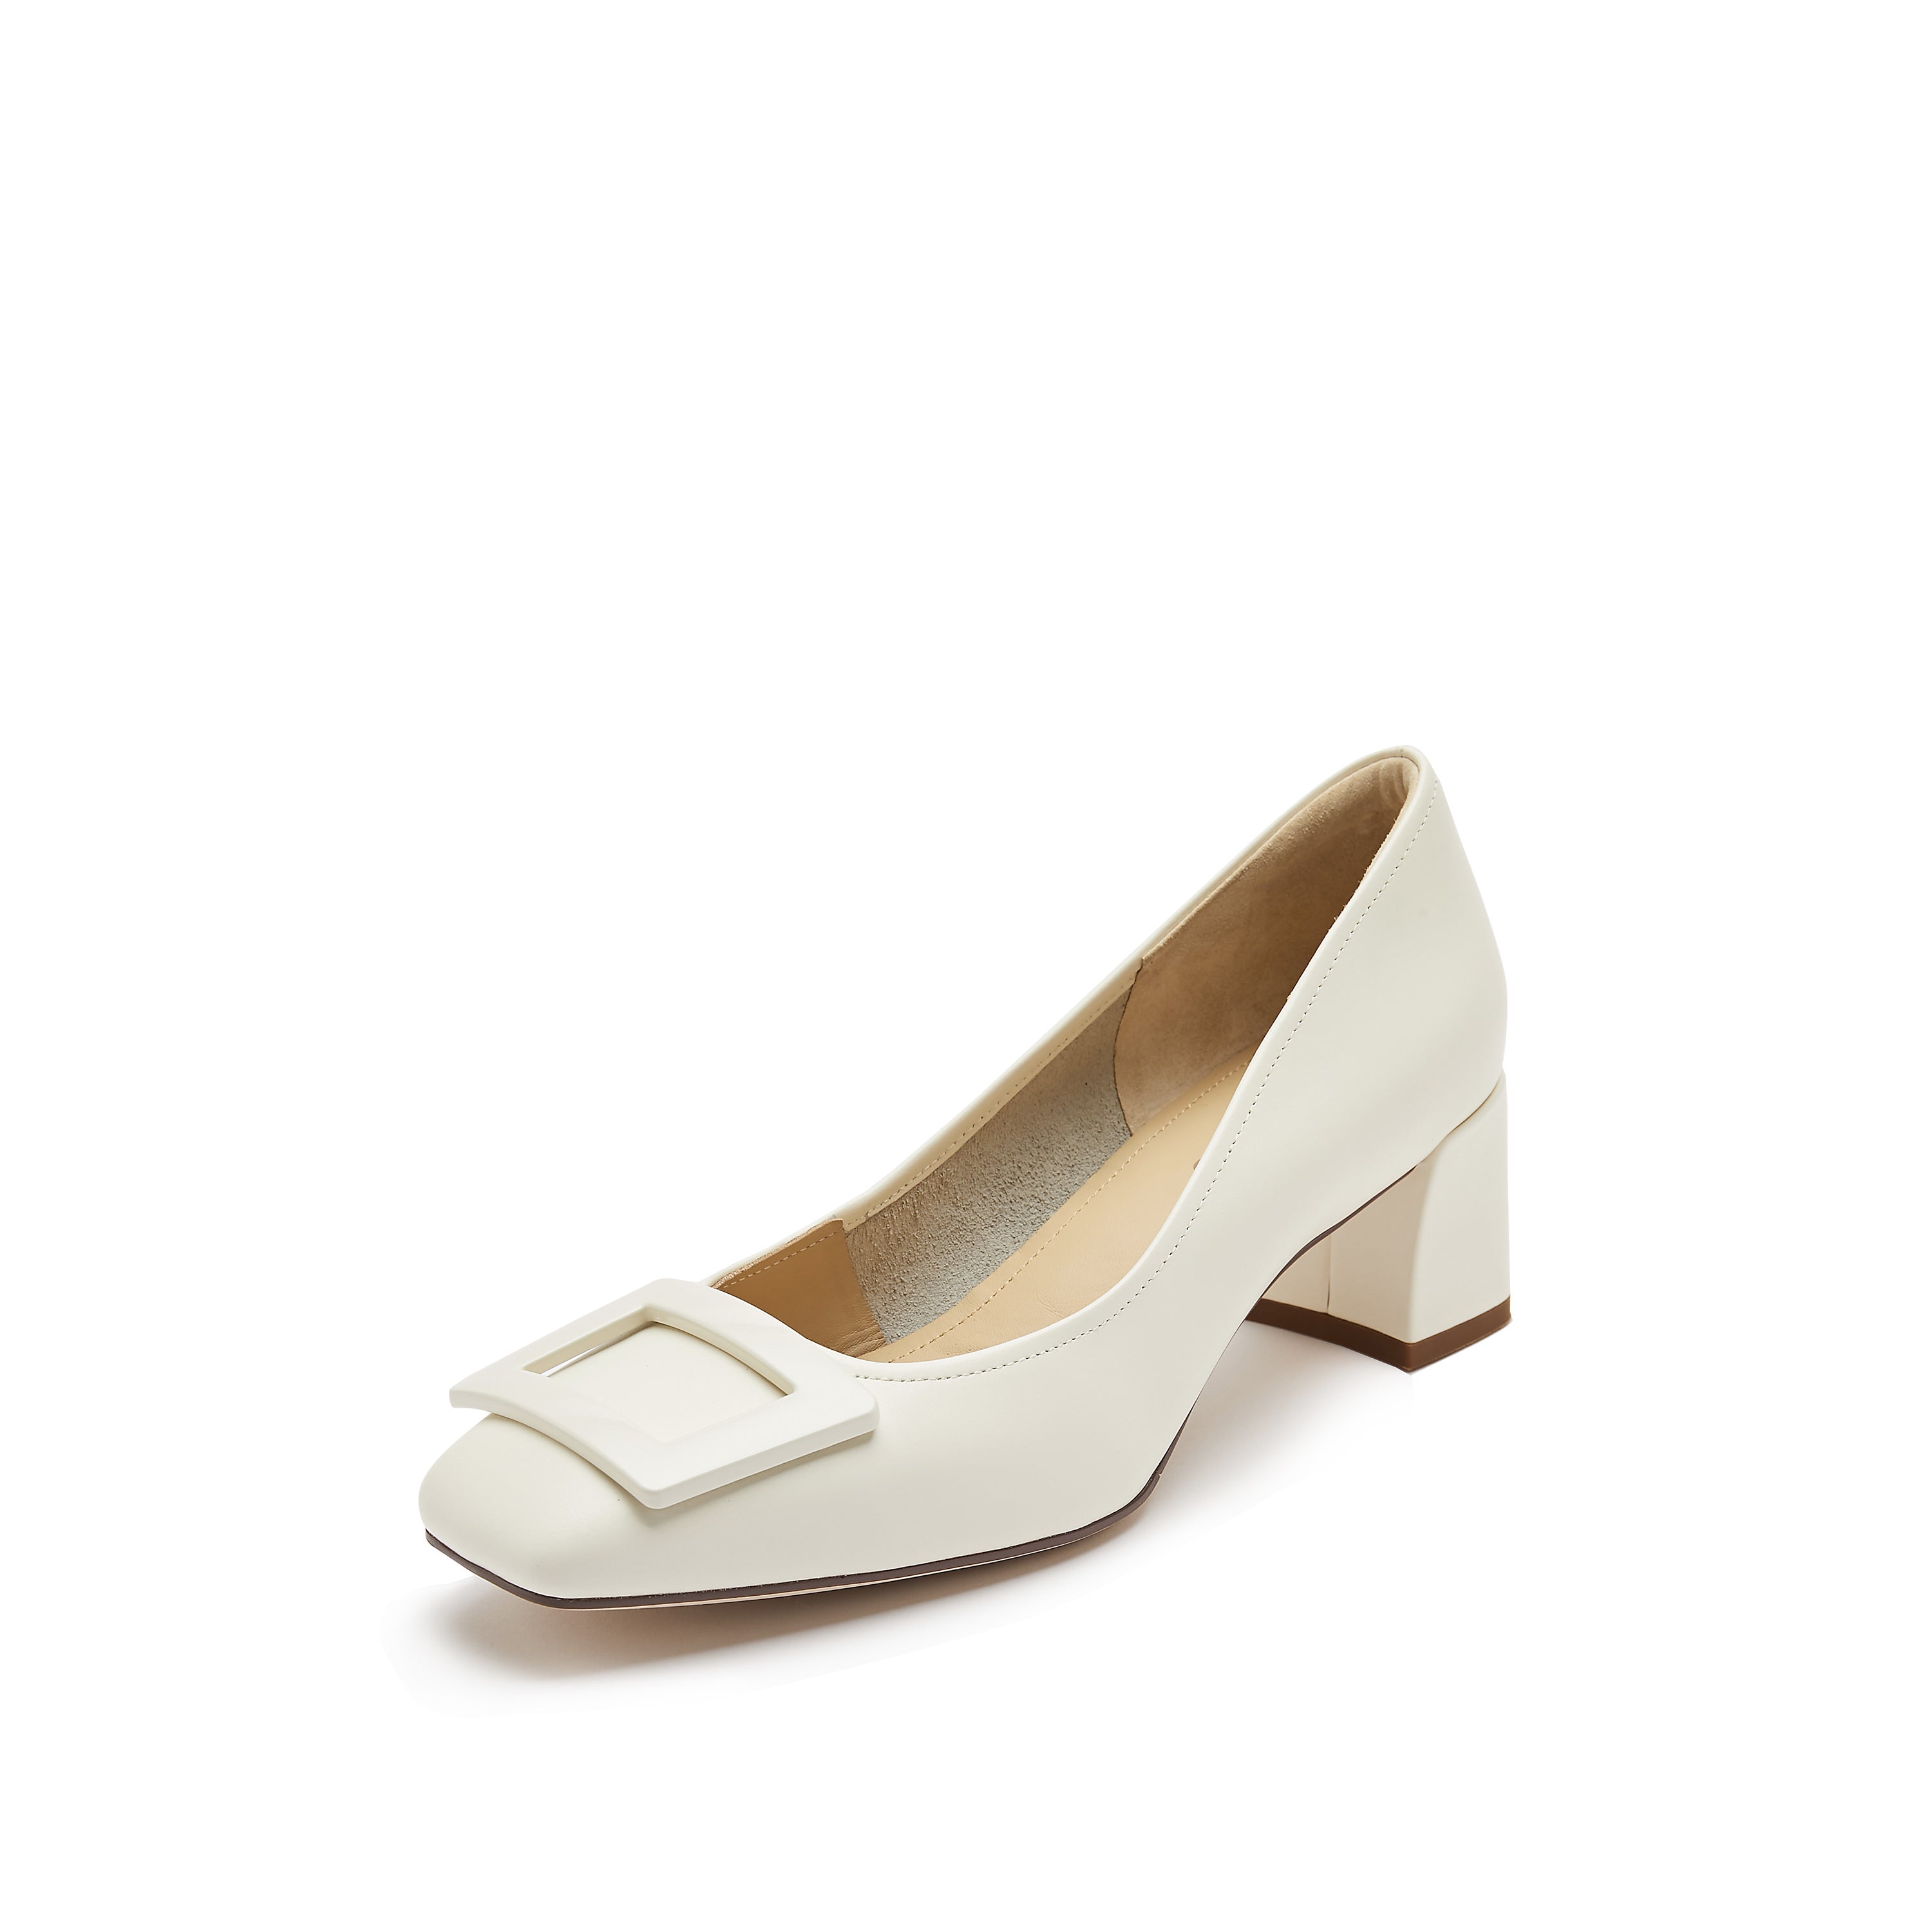 Beige Square Buckle Leather Pumps